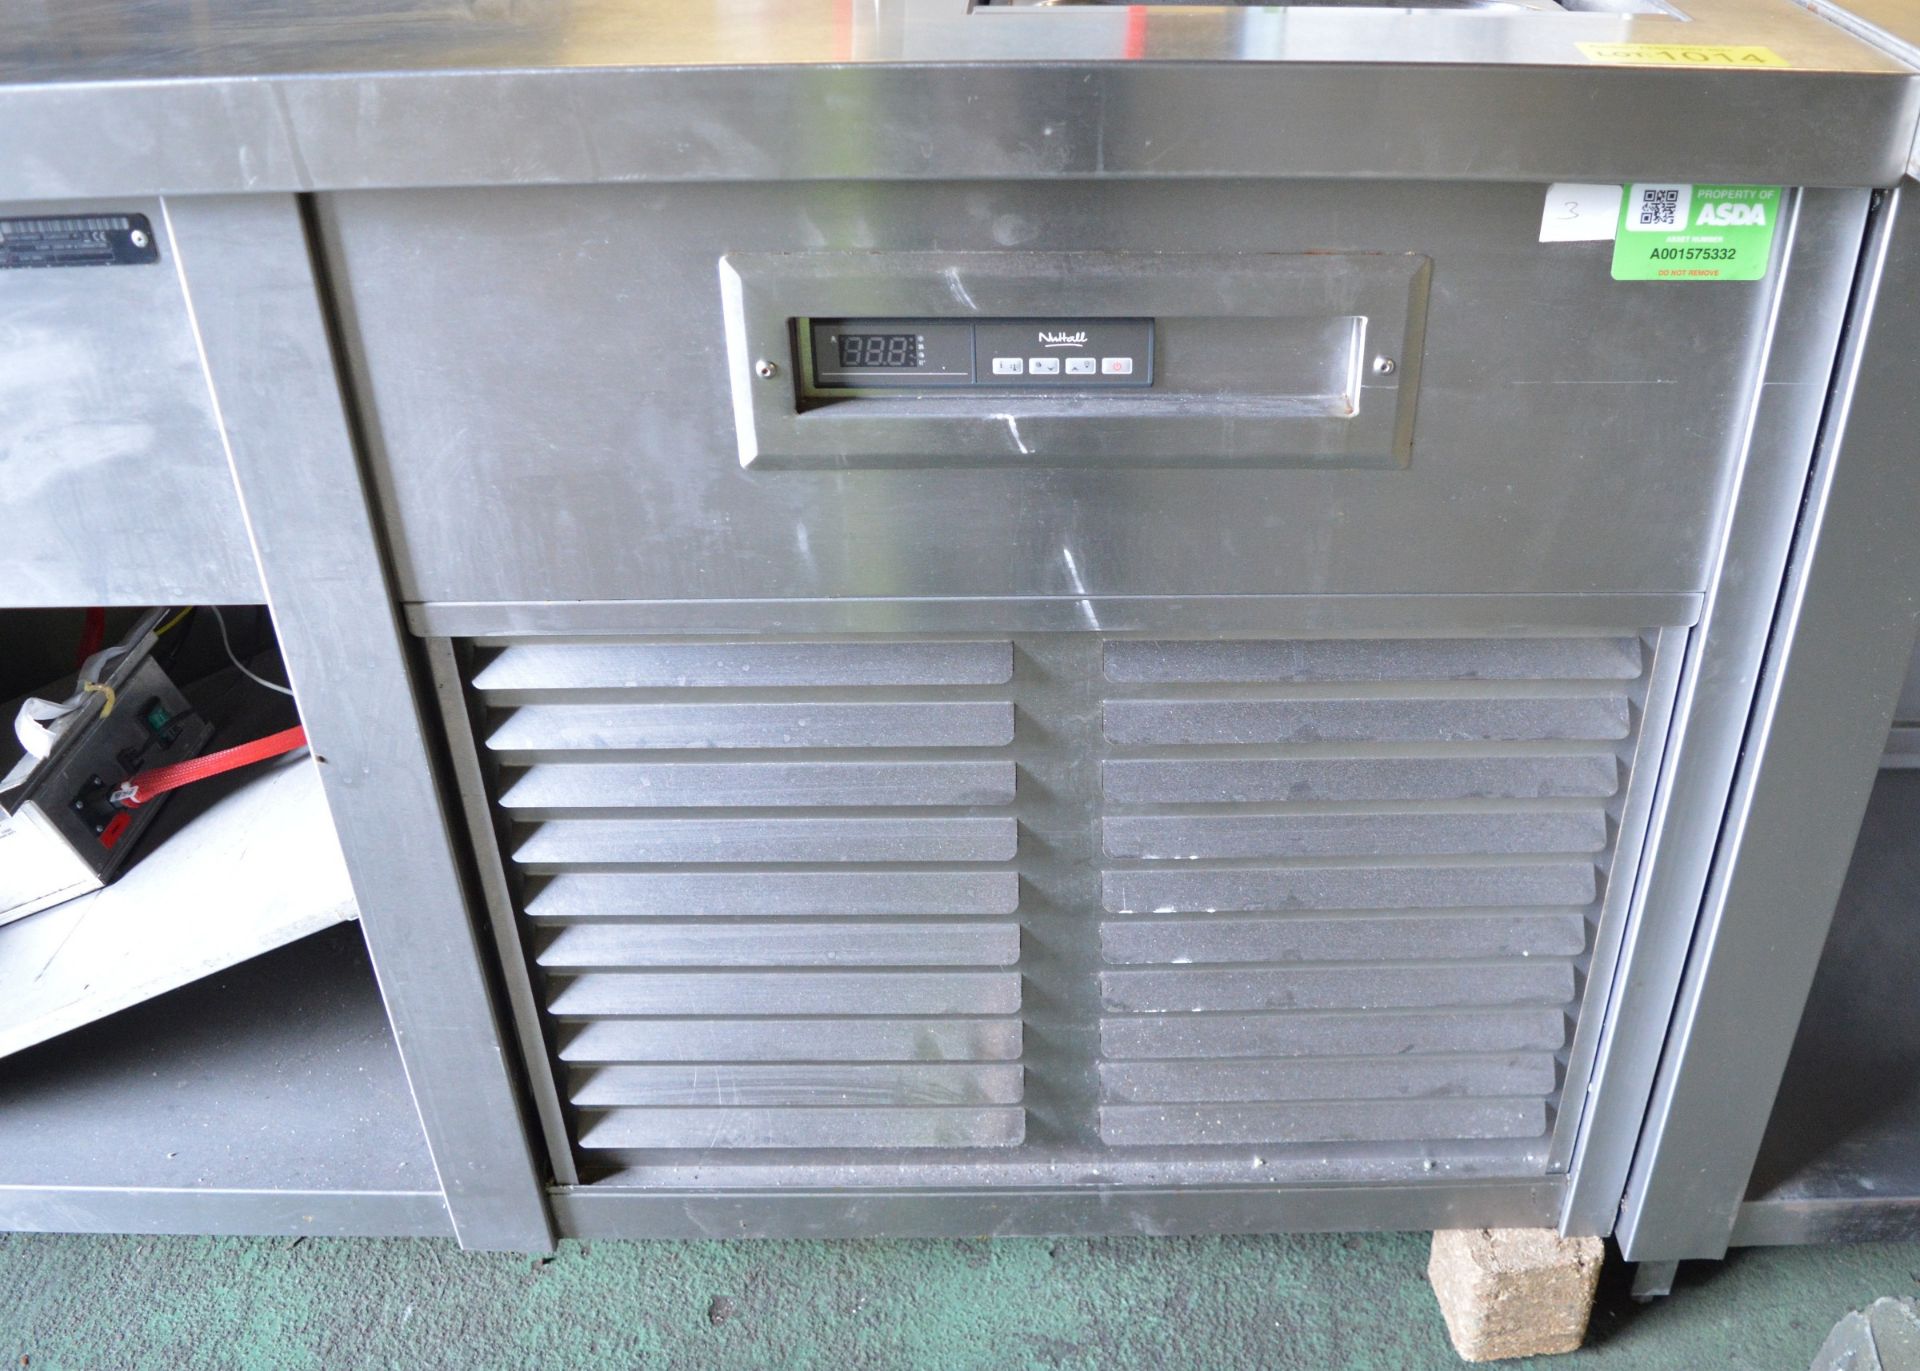 Nuttall Stainless Steel Heated Bain Marie Unit - L1500 x D750 x H960mm - Image 3 of 7